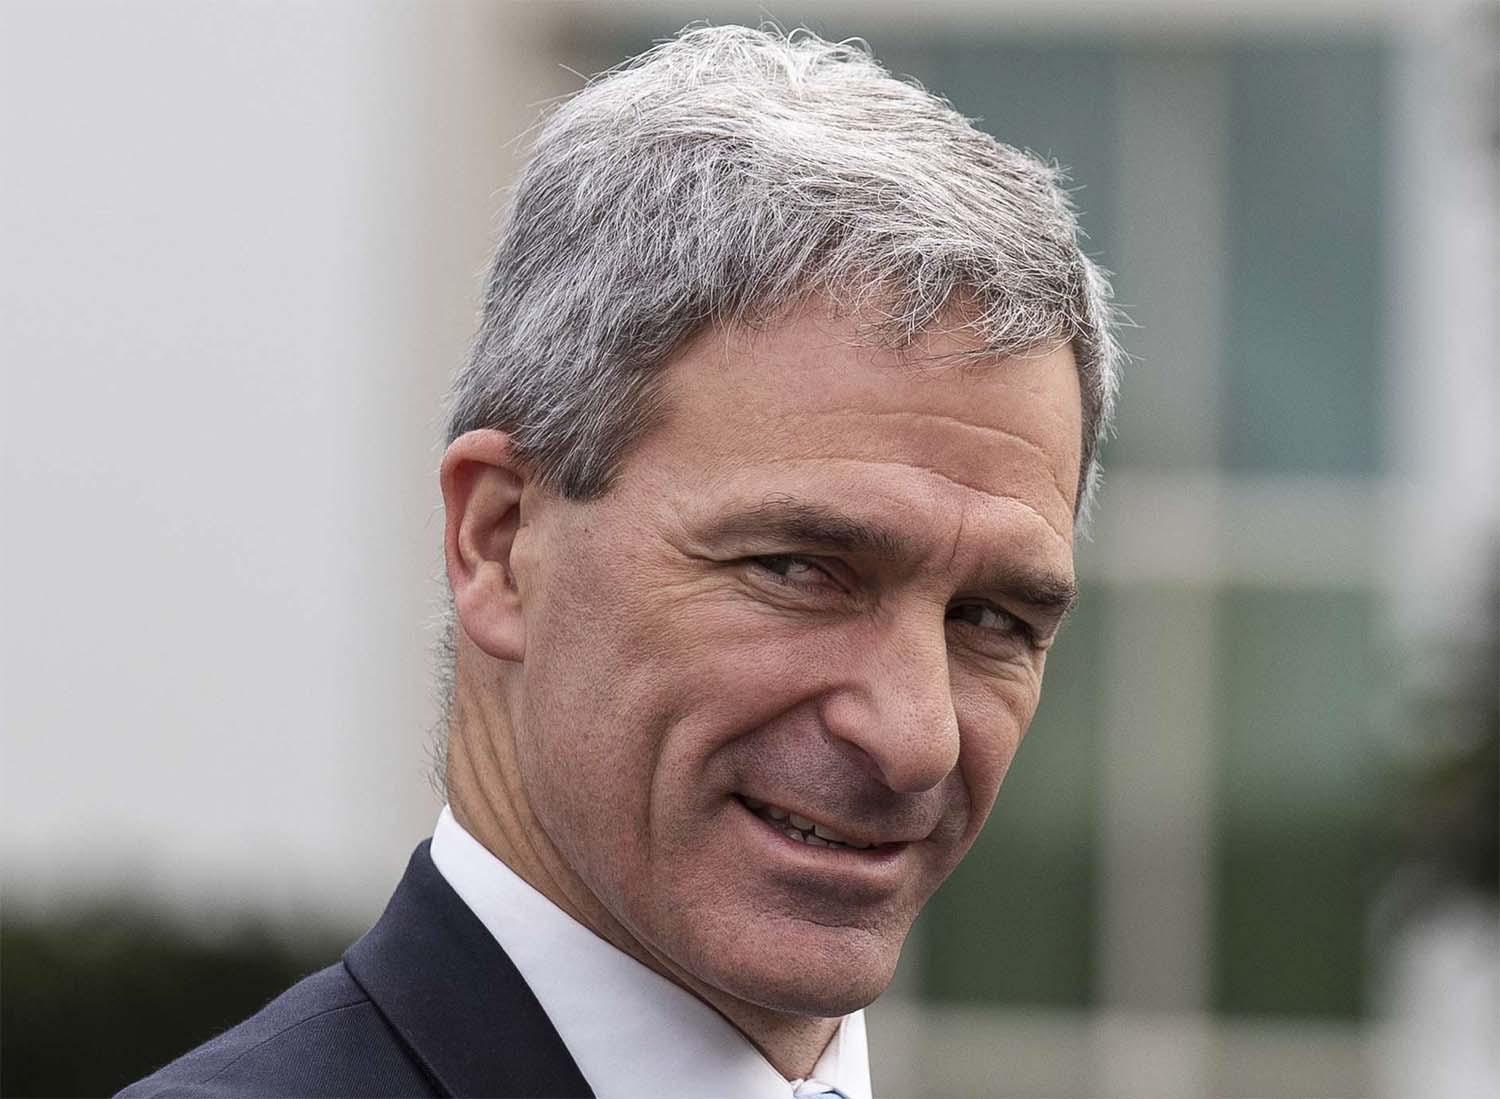 Acting Deputy Secretary for the Department of Homeland Security Ken Cuccinelli 